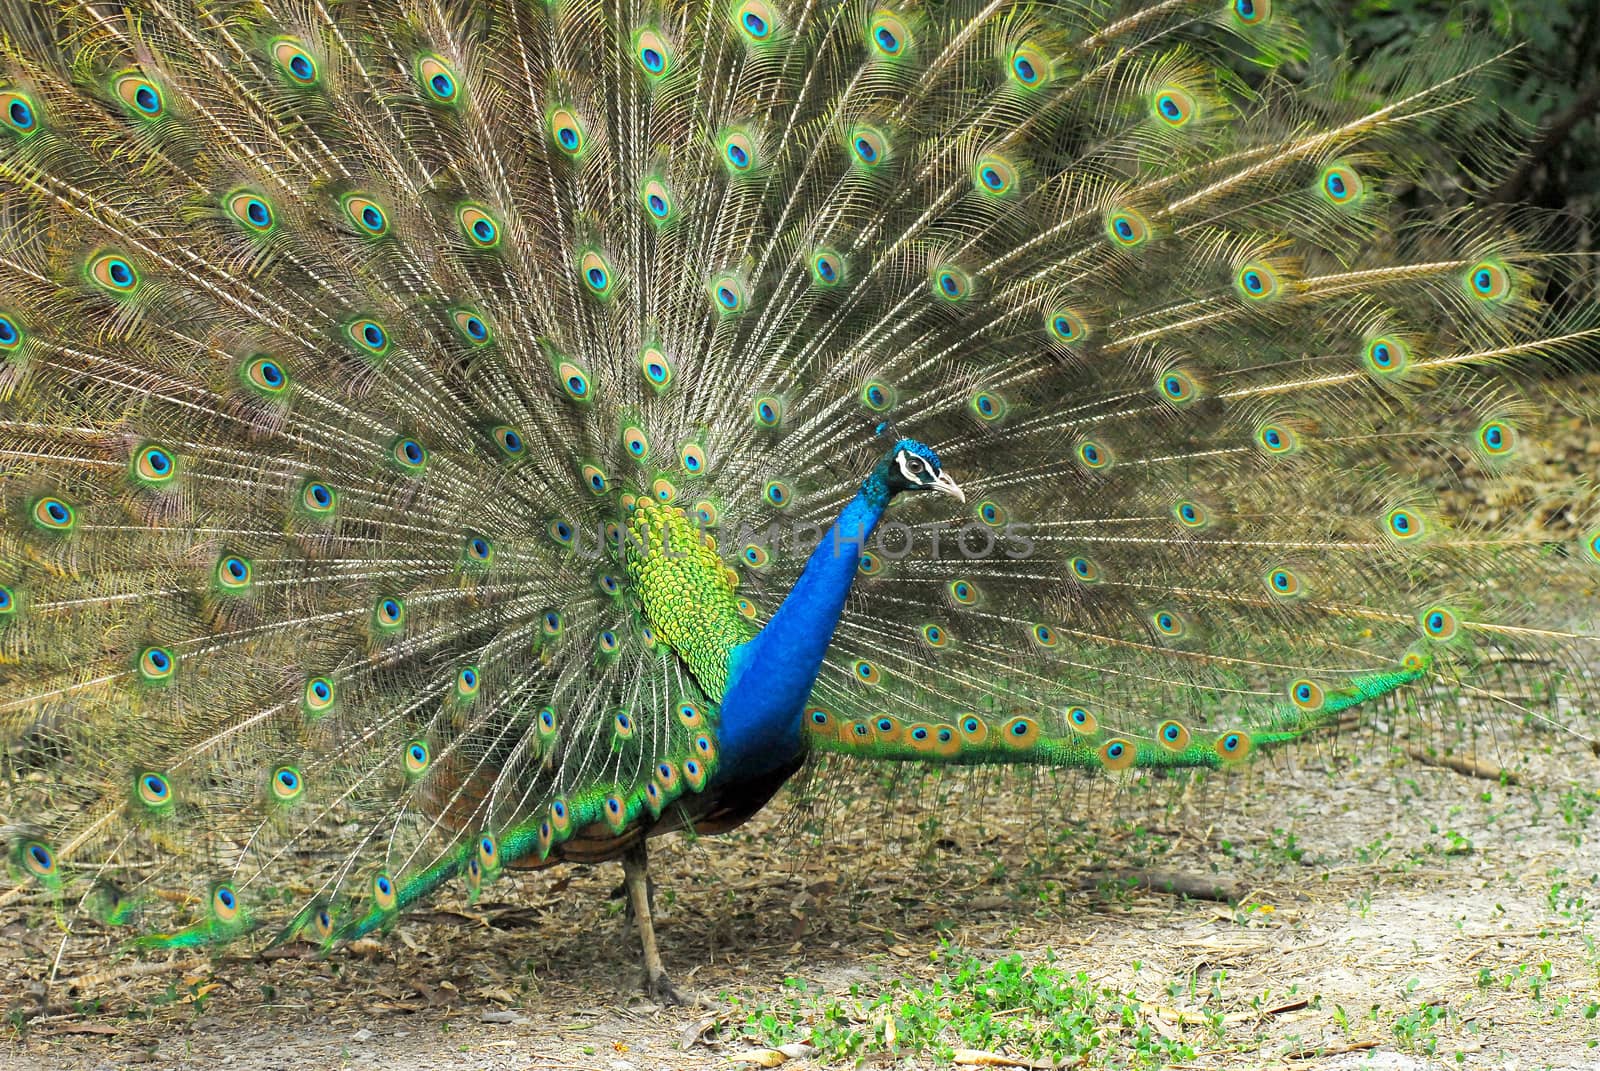 Close-up of Male Indian Peafowl displaying tail feathers by think4photop